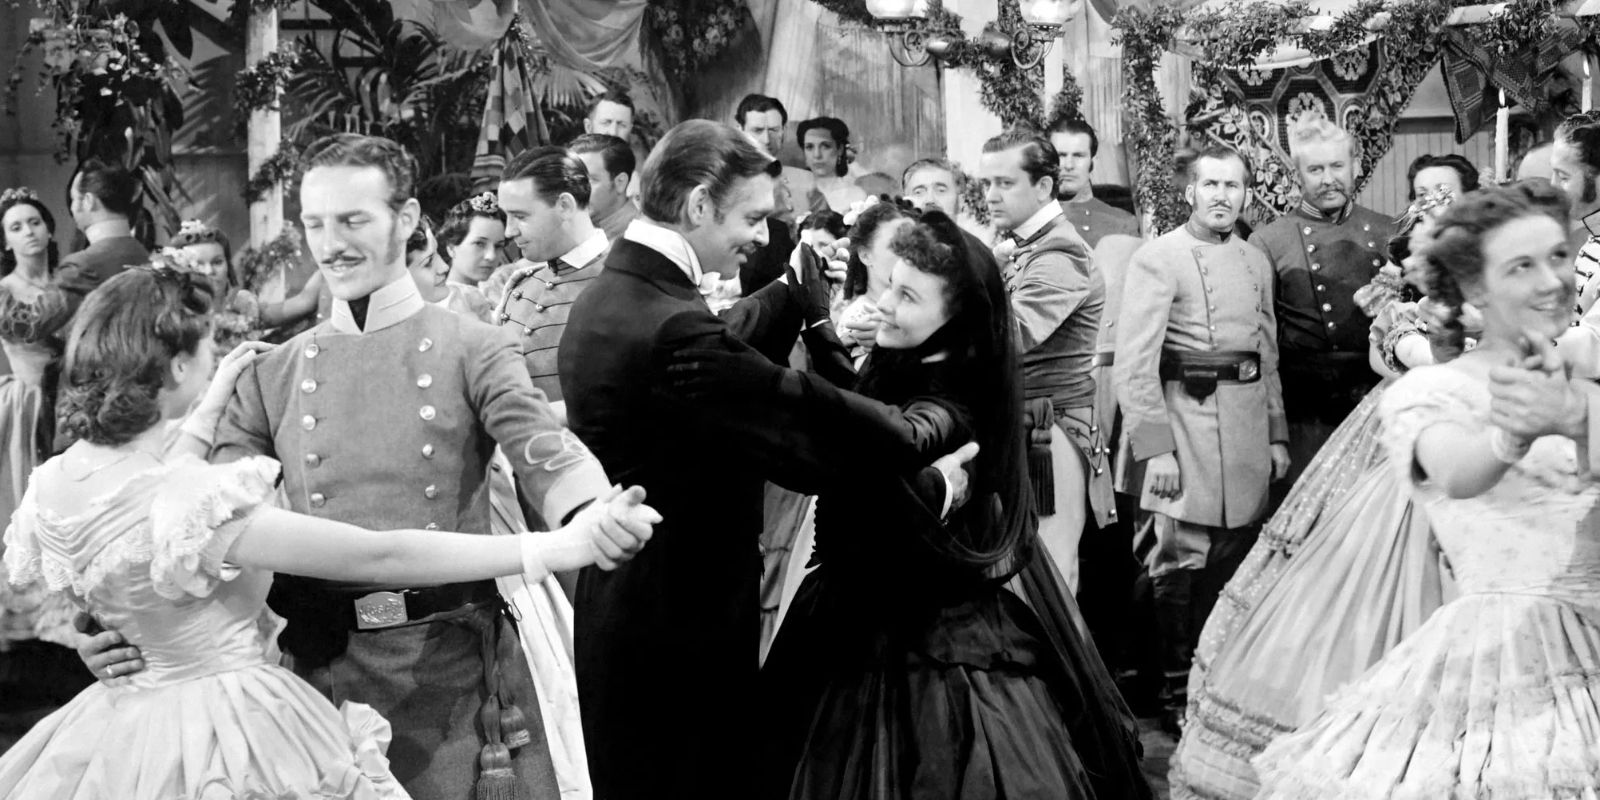 Rhett and Scarlett dancing among a crowd in Gone with the Wind